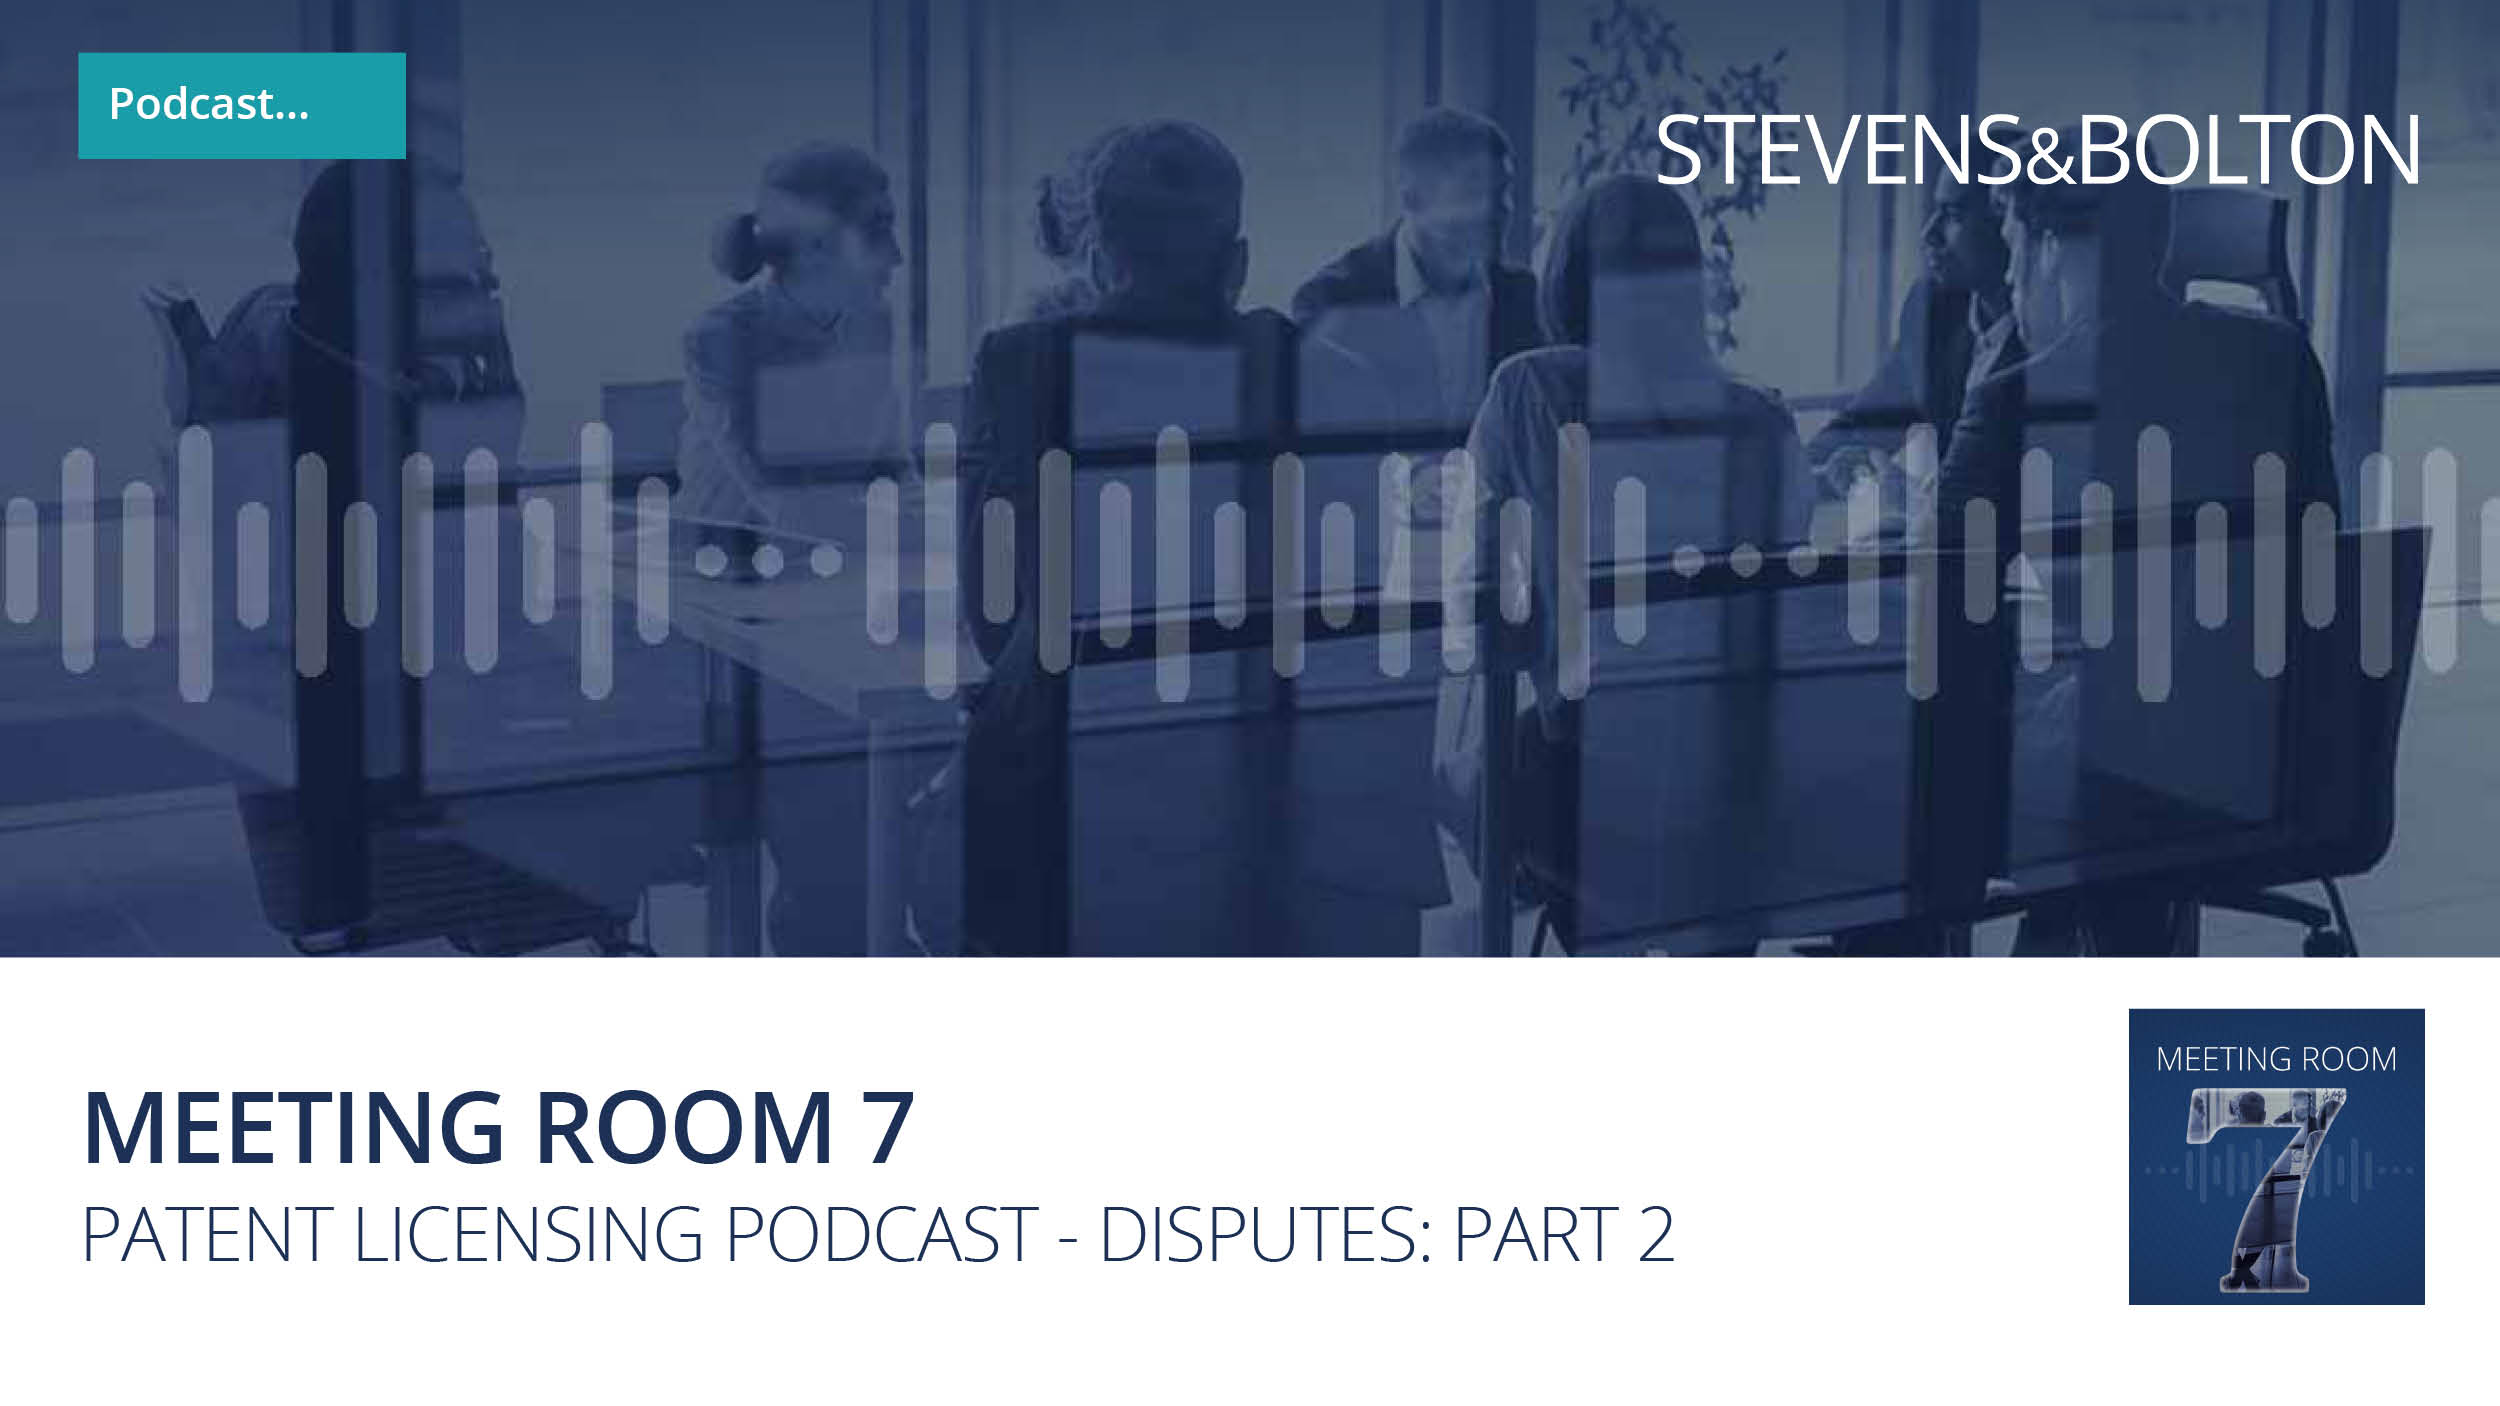 Meeting Room 7 - The patent licensing podcast - Disputes part 2